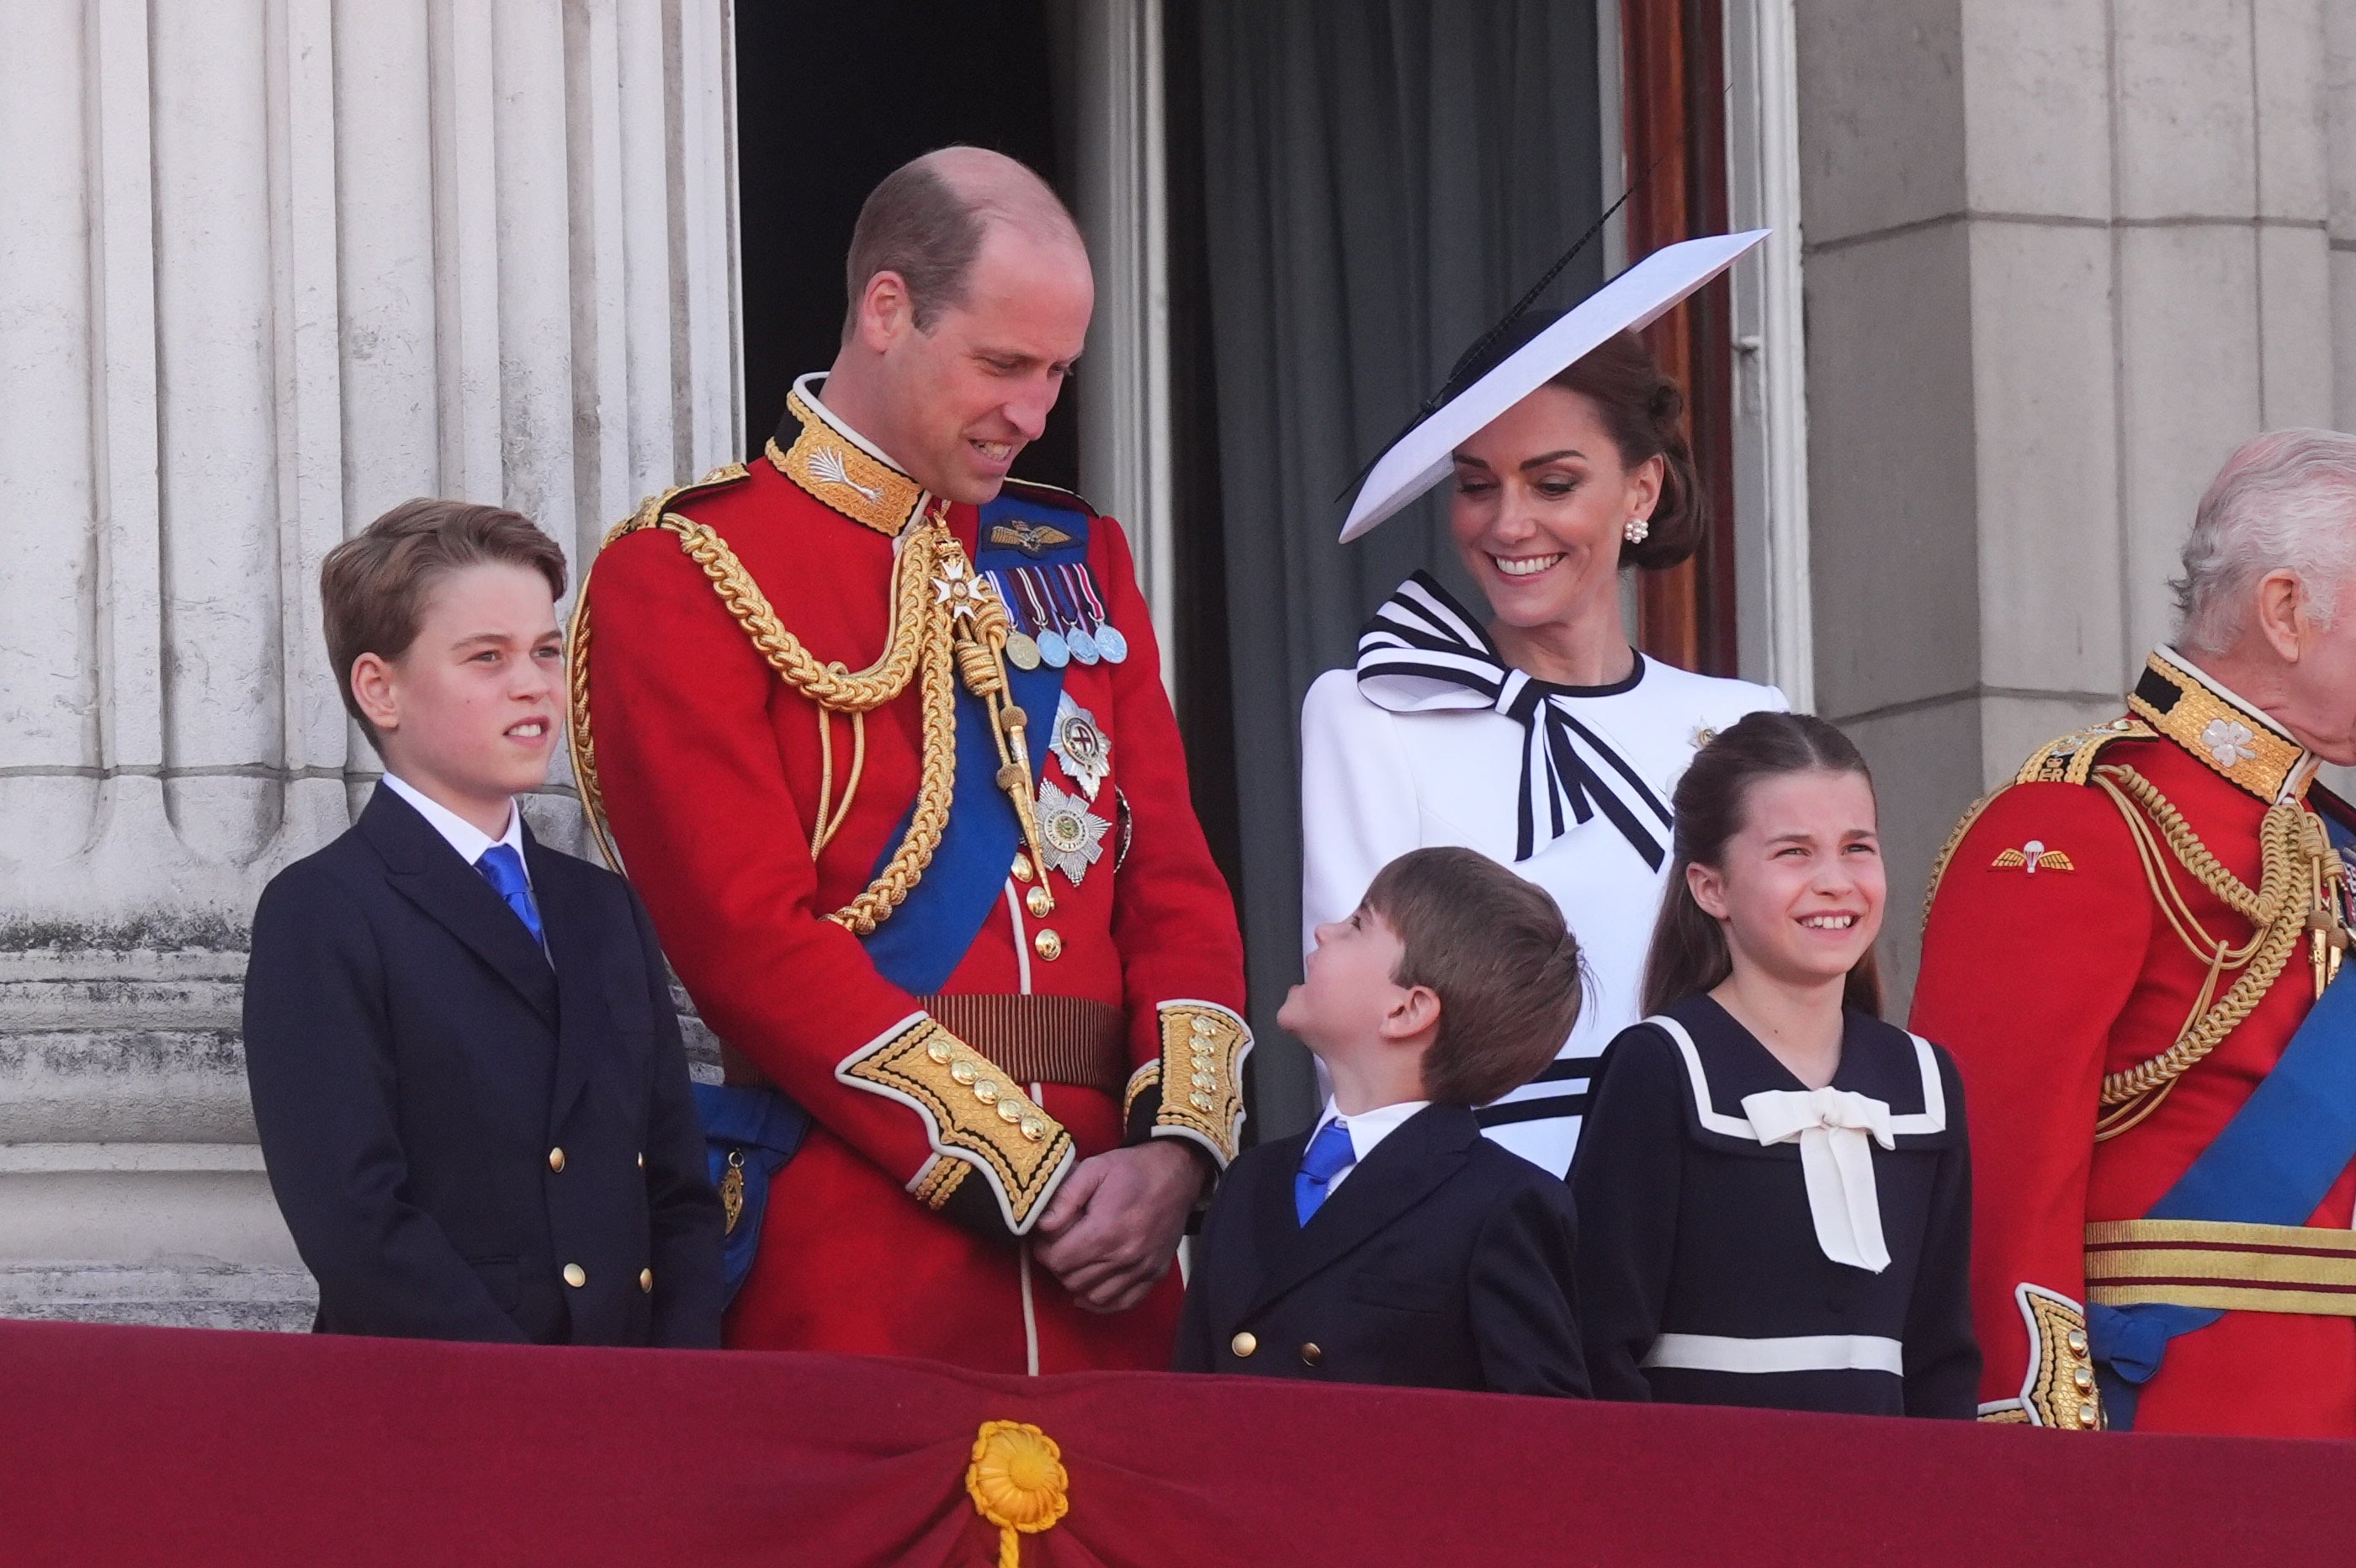 Prince William and Kate share a sweet moment with their youngest son